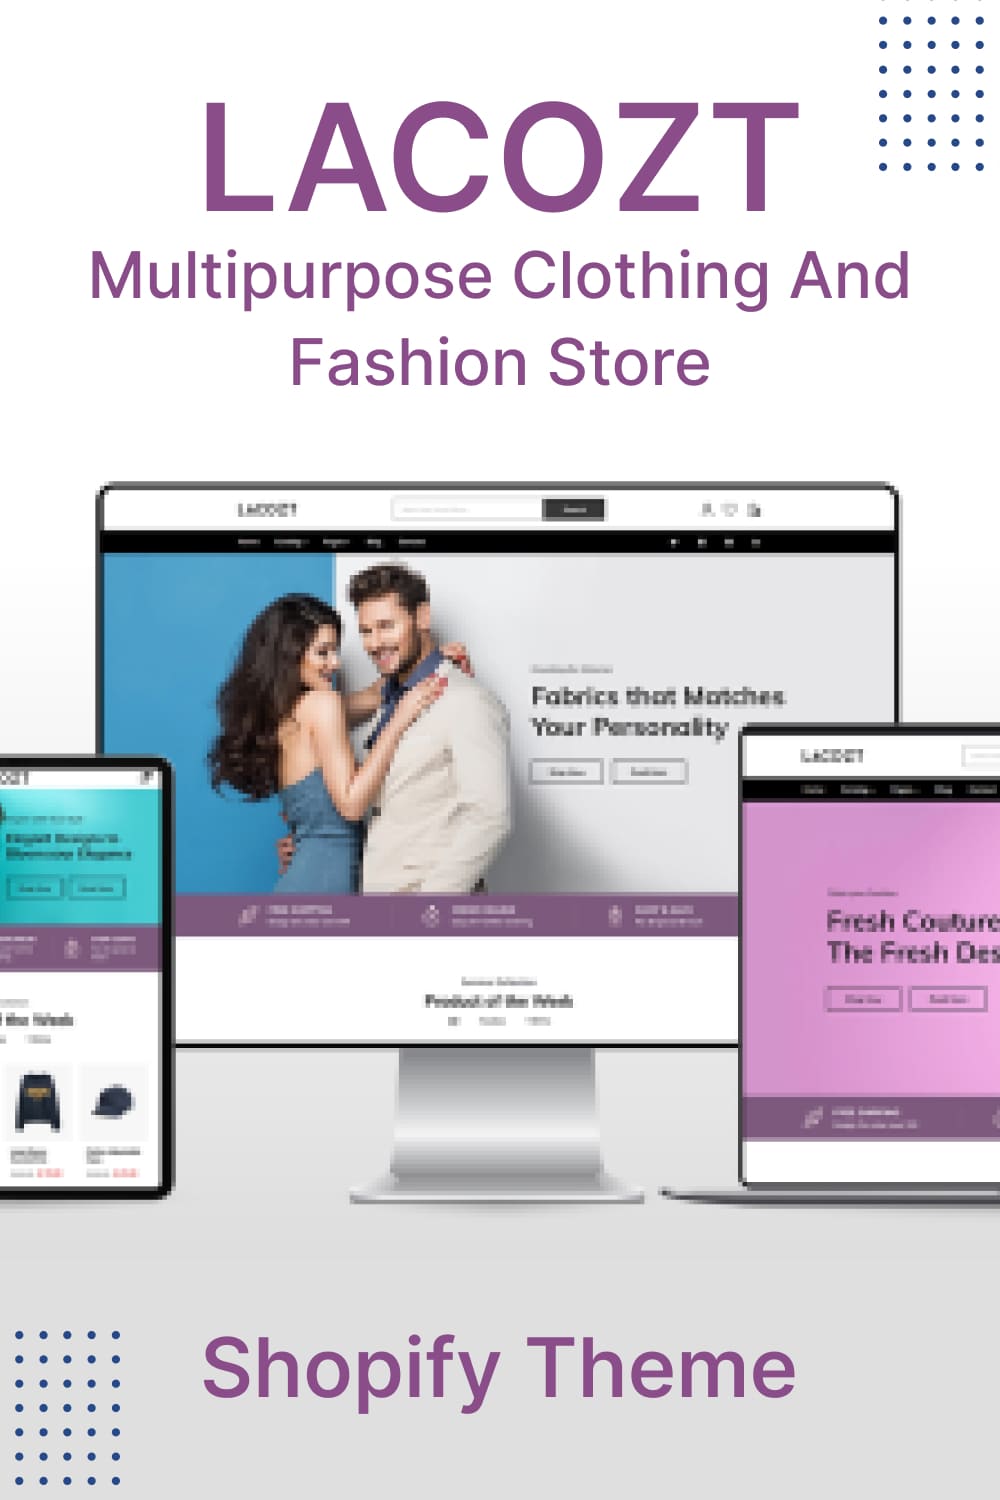 Preview Lacozt - Multipurpose Clothing, Fashion Store Shopify Theme on the monitor, mobile and tablet.